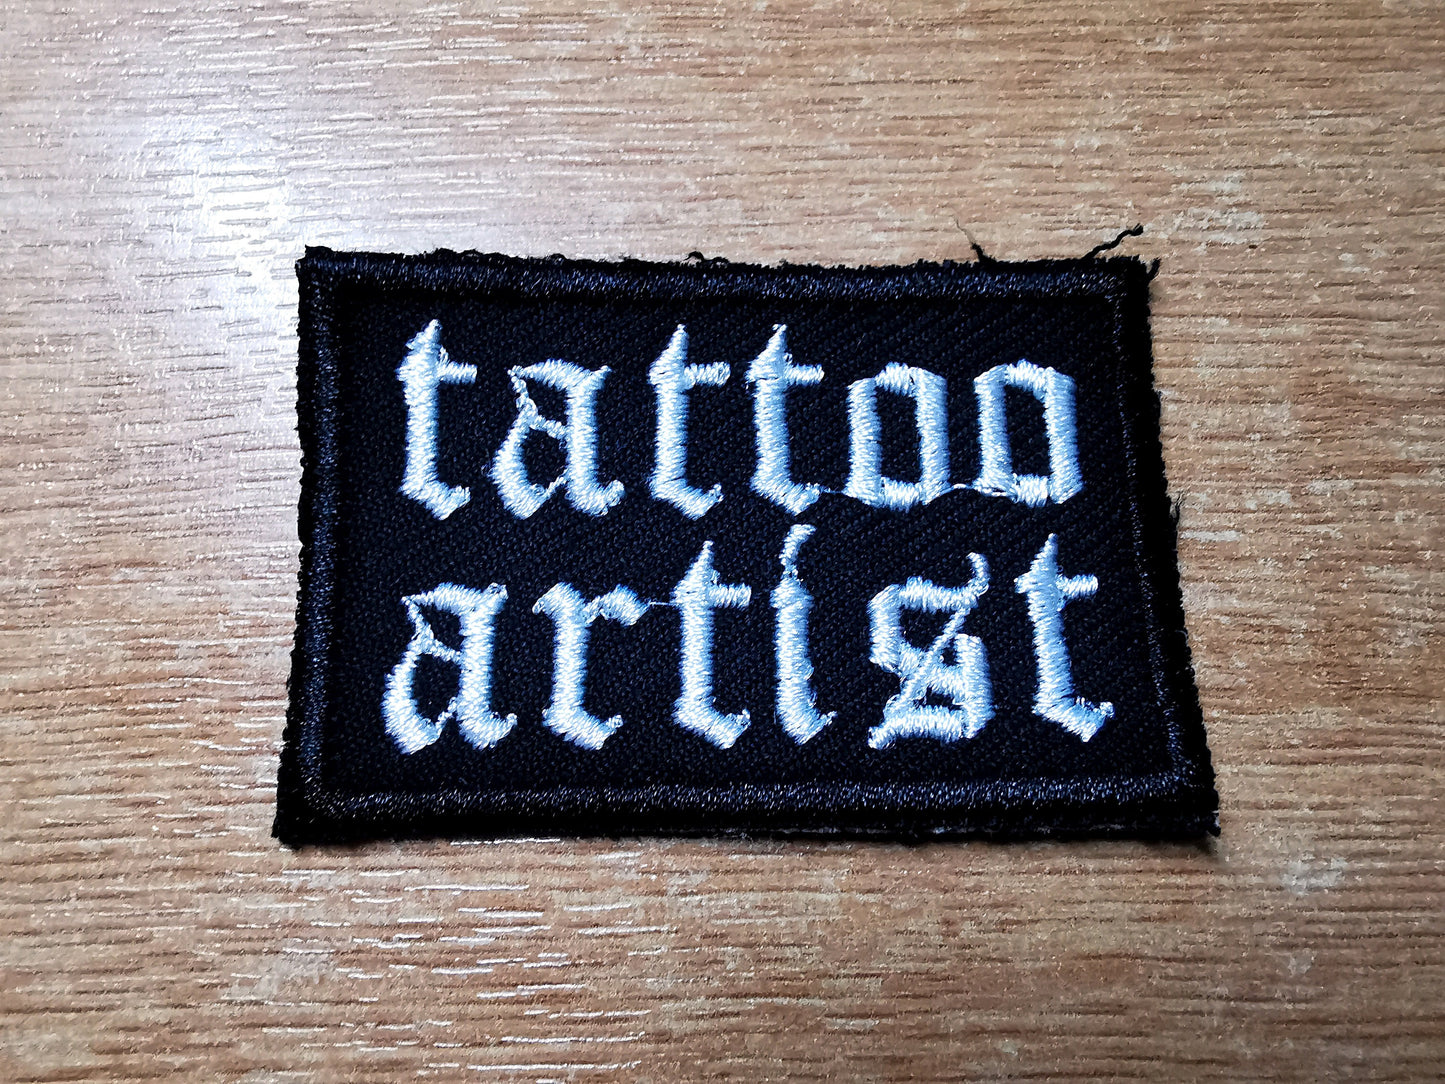 Tattoo Artist Embroidered Patch